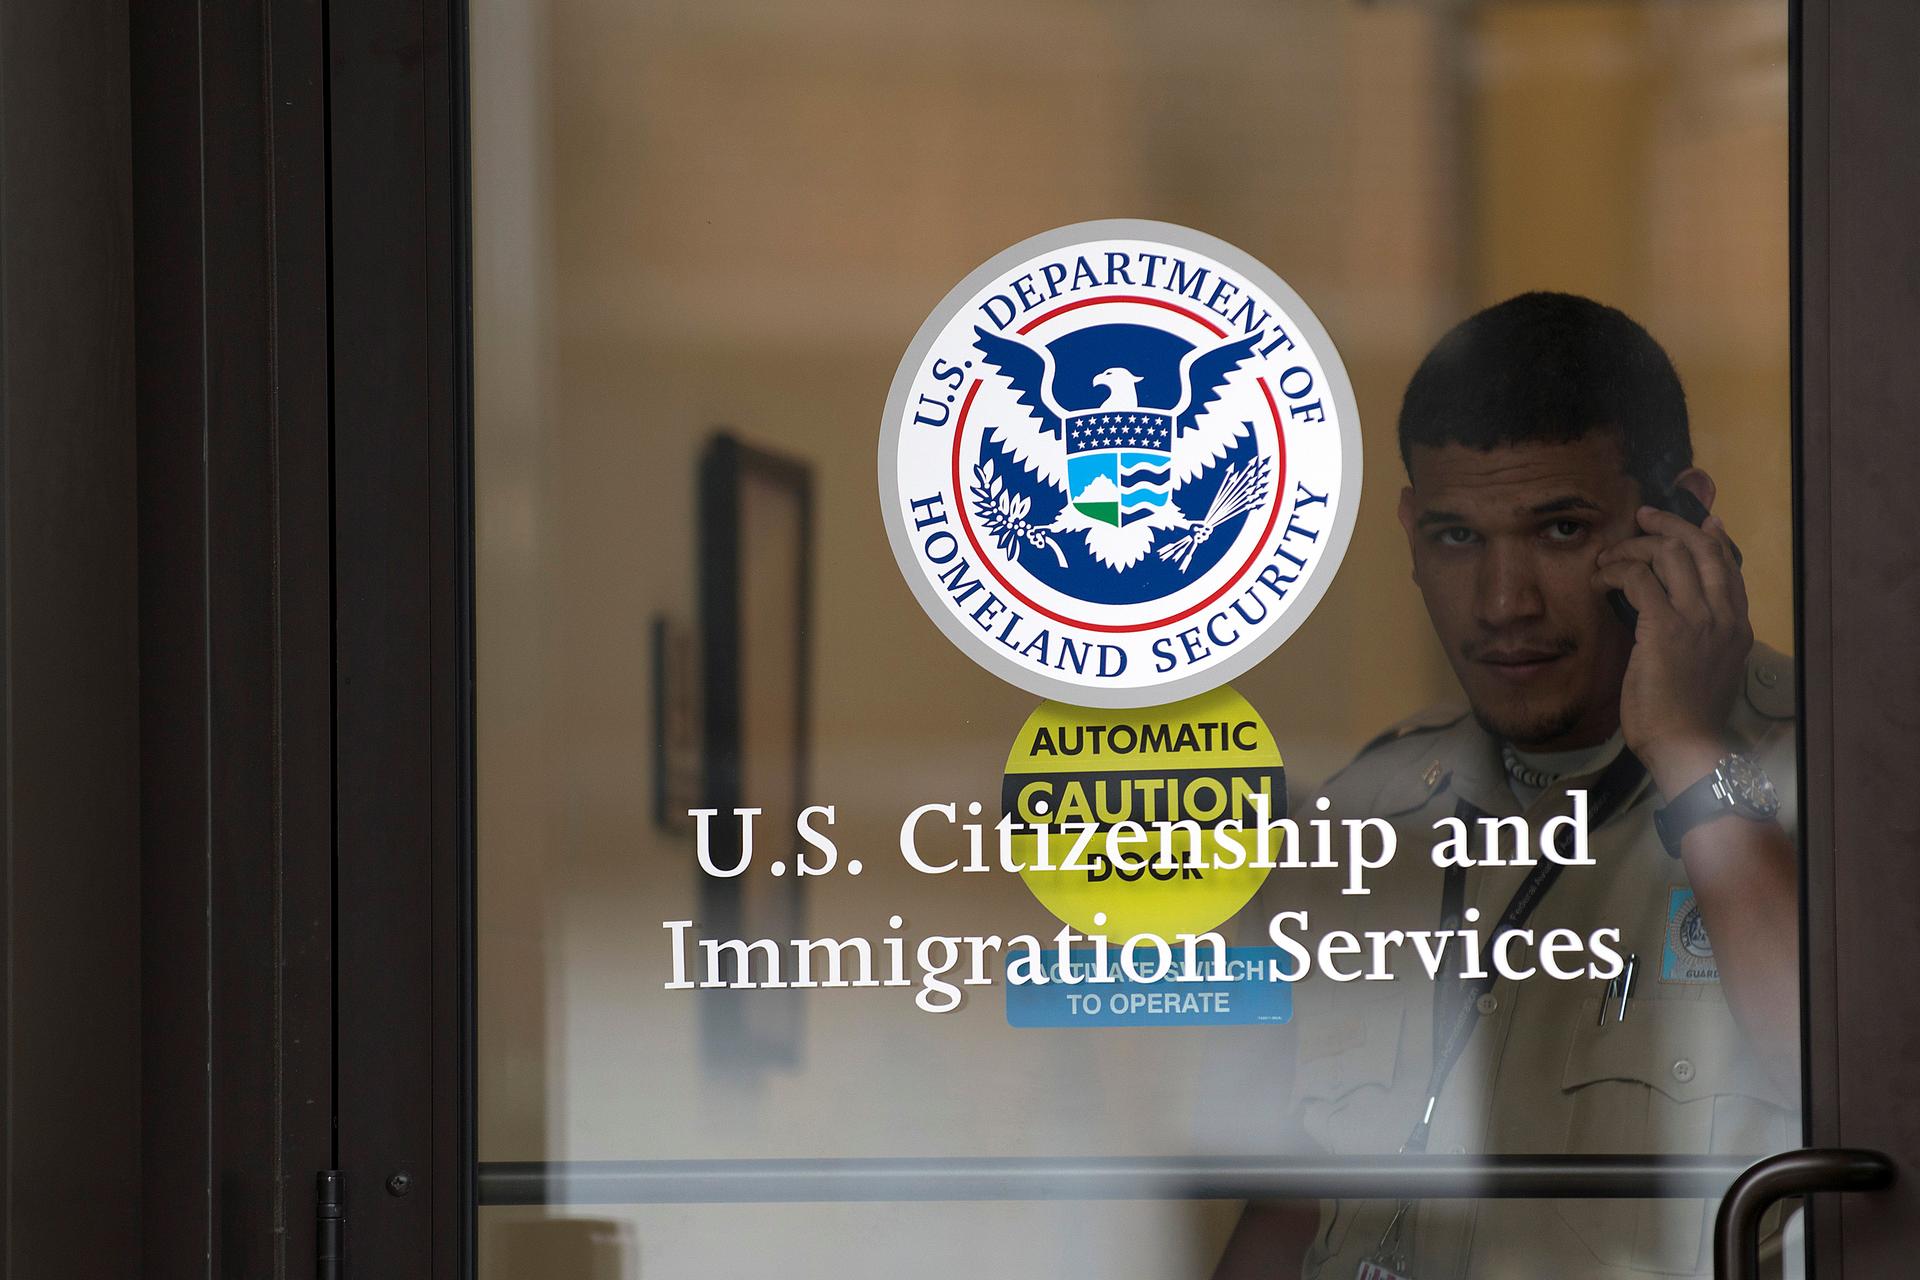 A security guard looks out of the U.S. Citizenship and Immigration Services offices in New York, U.S. on August 15, 2012.